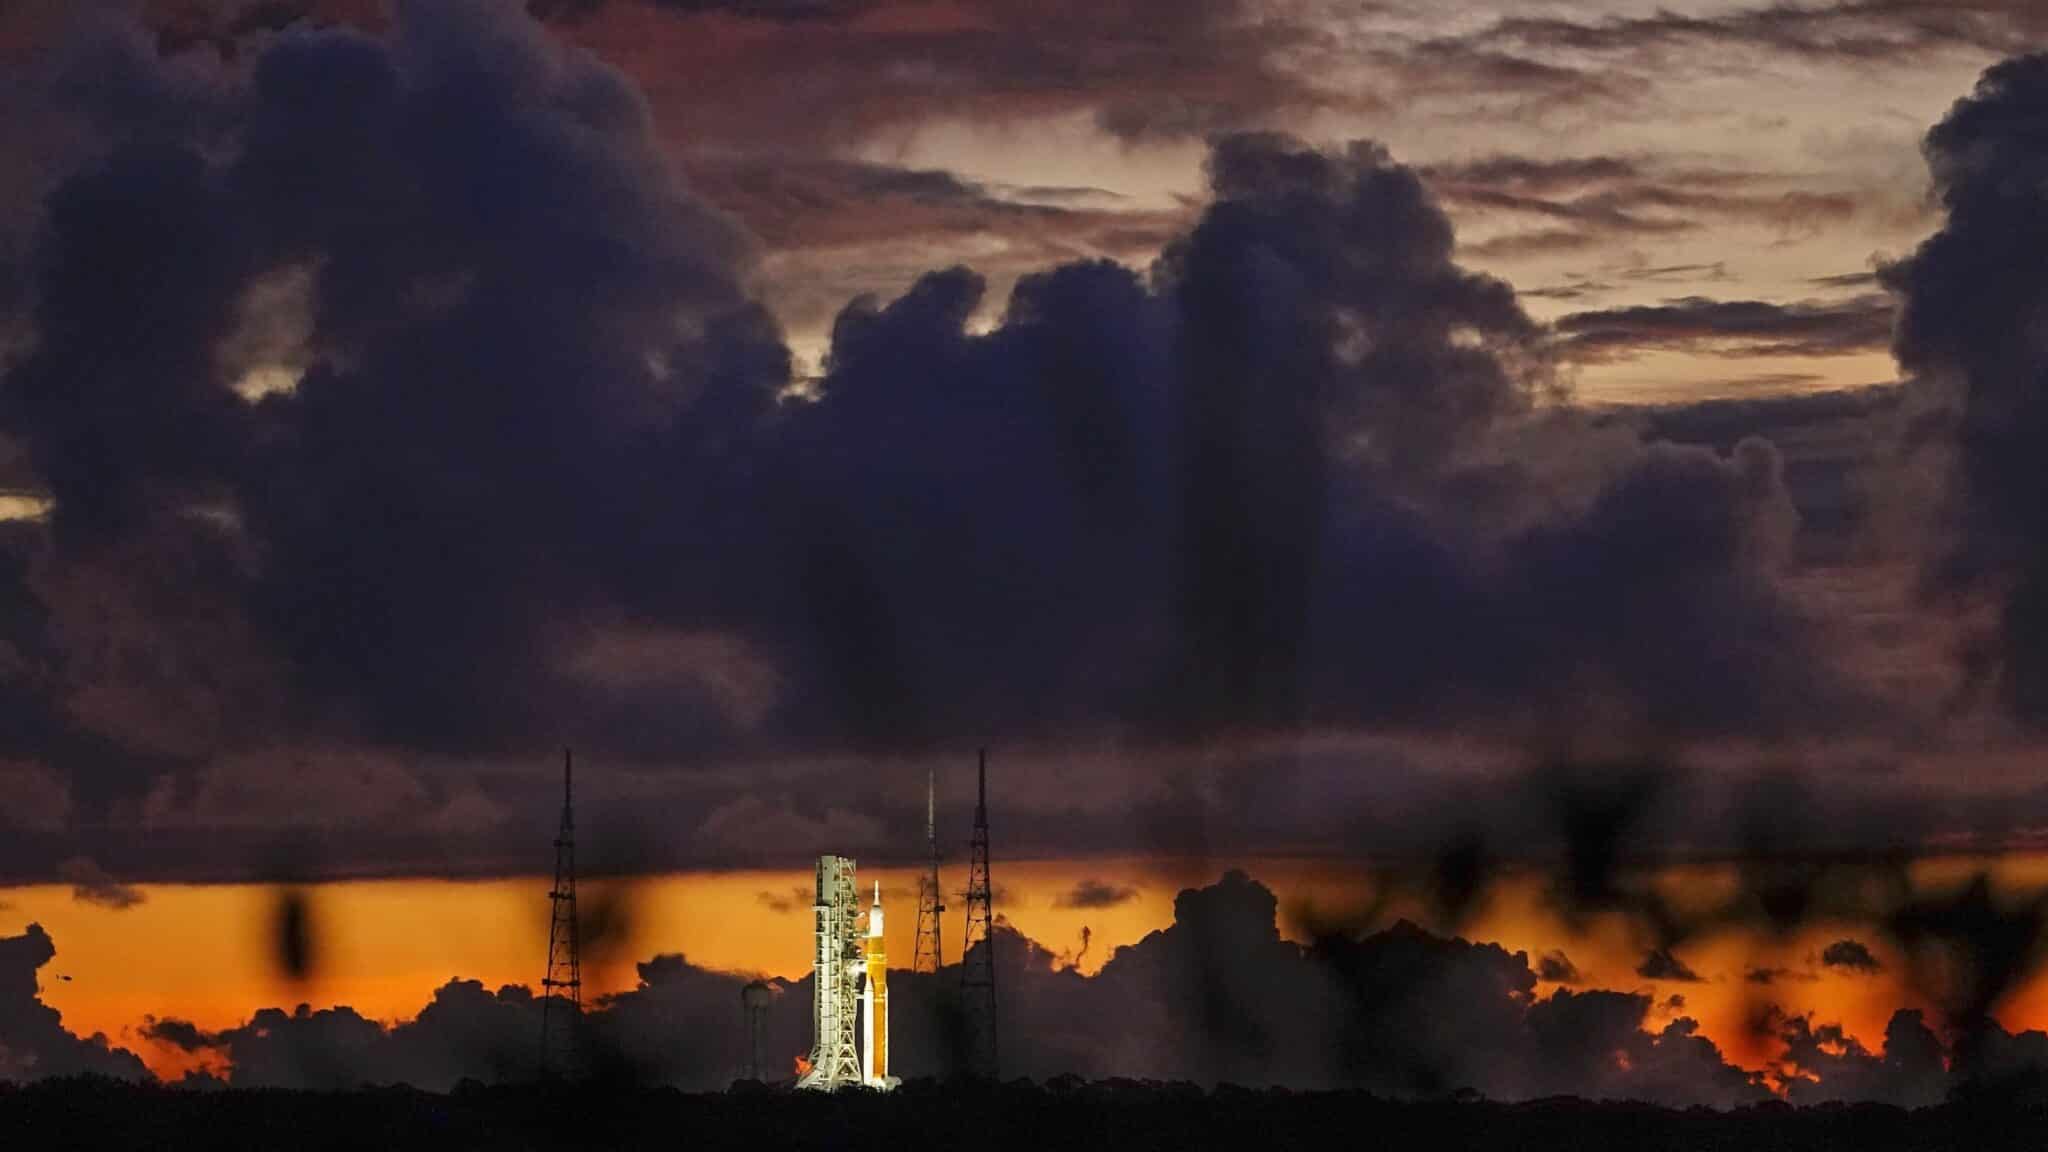 The NASA moon rocket stands ready at sunrise on Pad 39B before the Artemis 1 mission to orbit the moon at the Kennedy Space Center, Monday, Aug. 29, 2022, in Cape Canaveral, Fla. (AP Photo/Brynn Anderson)